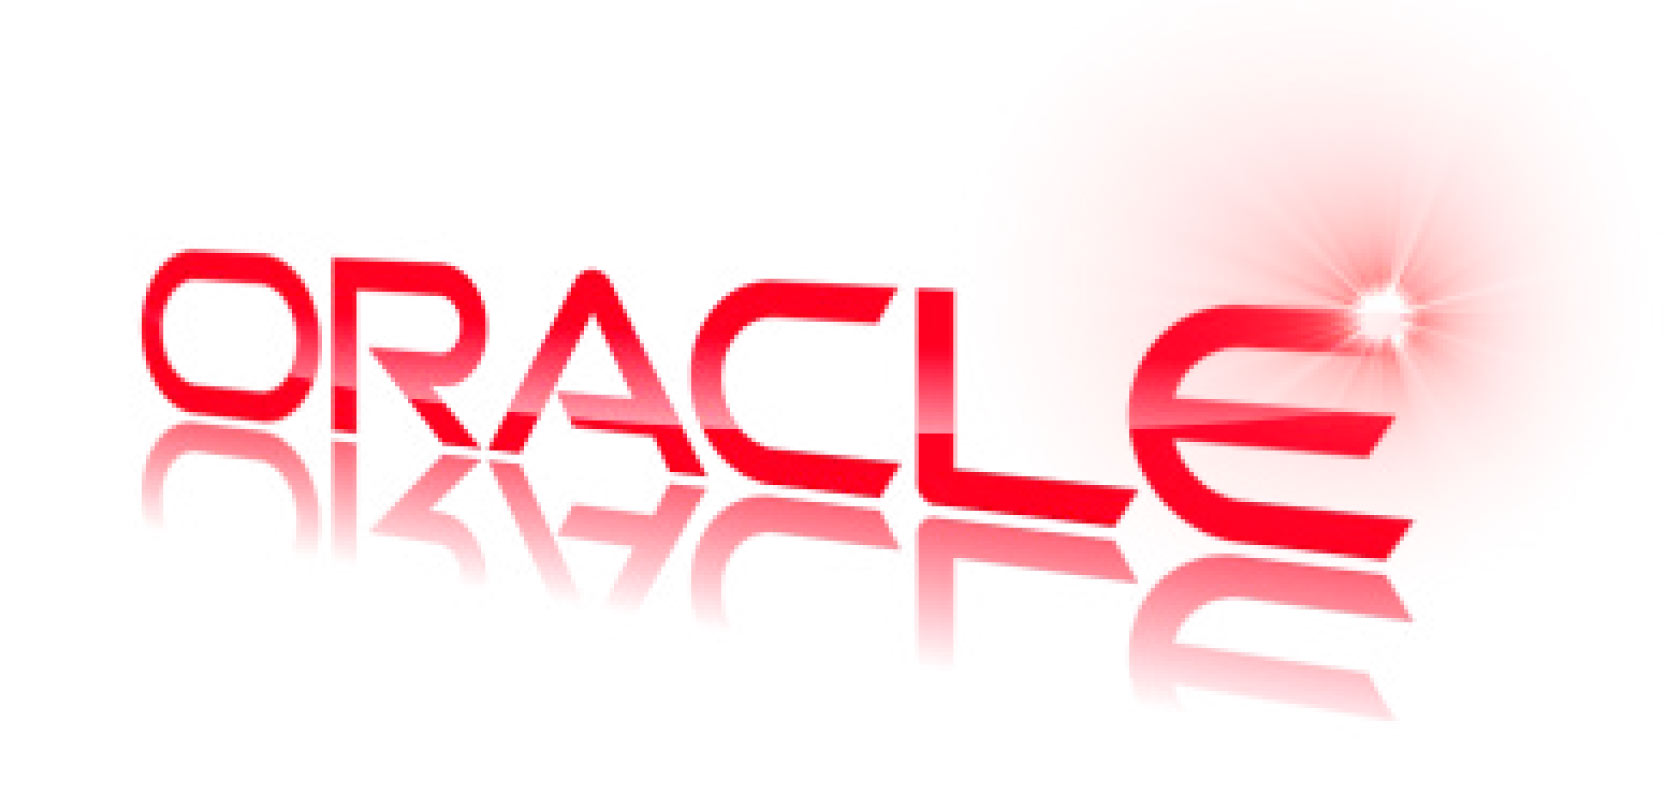 Oracle-interview-questions.jpg